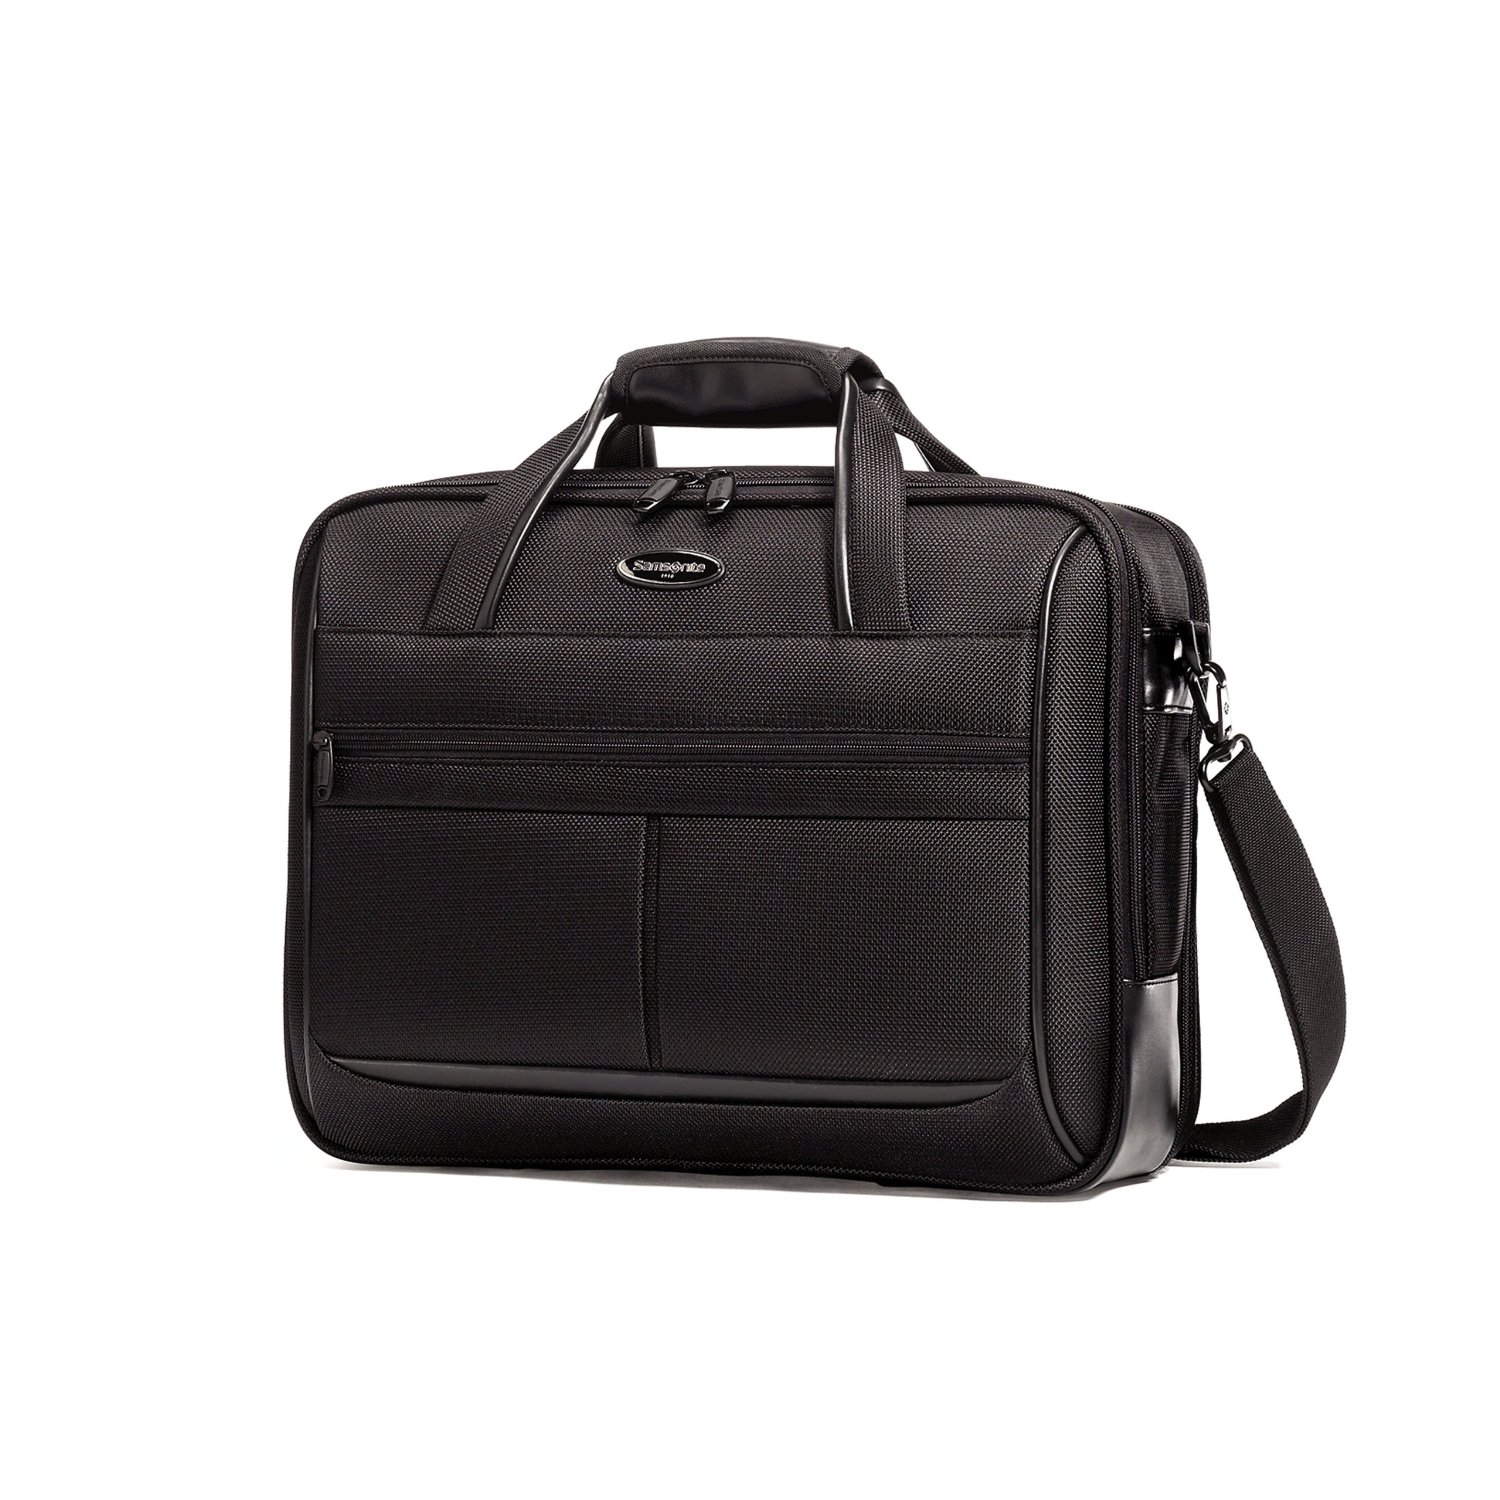 Samsonite Overdrive Checkpoint Friendly Laptop Briefcase $39.99 